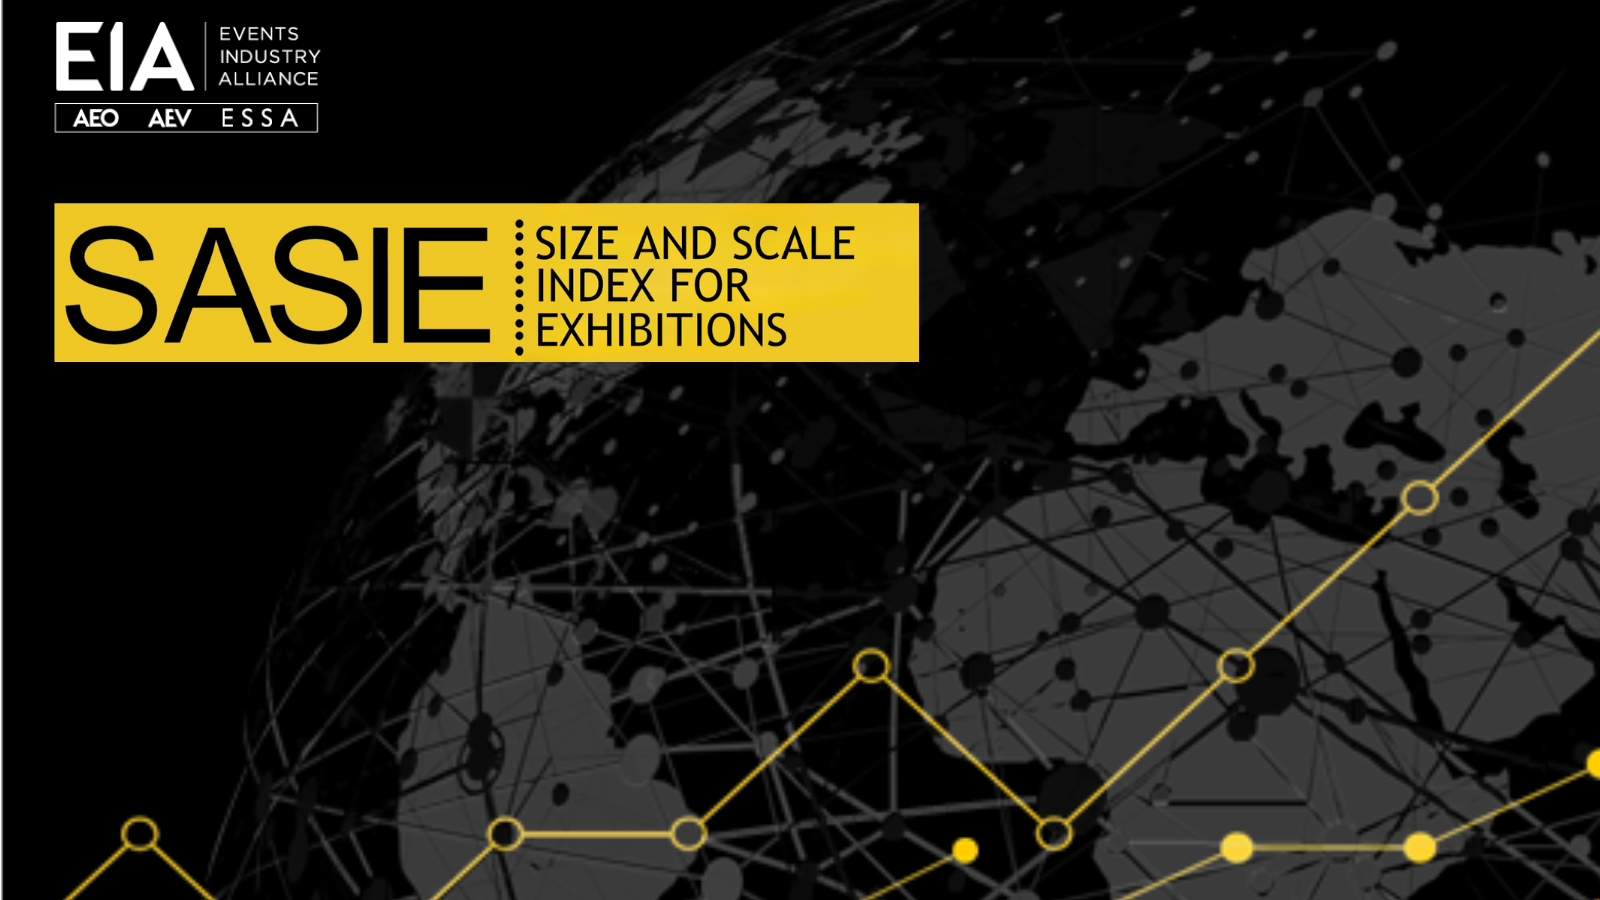 Size and scale index for exhibitions (SASIE)